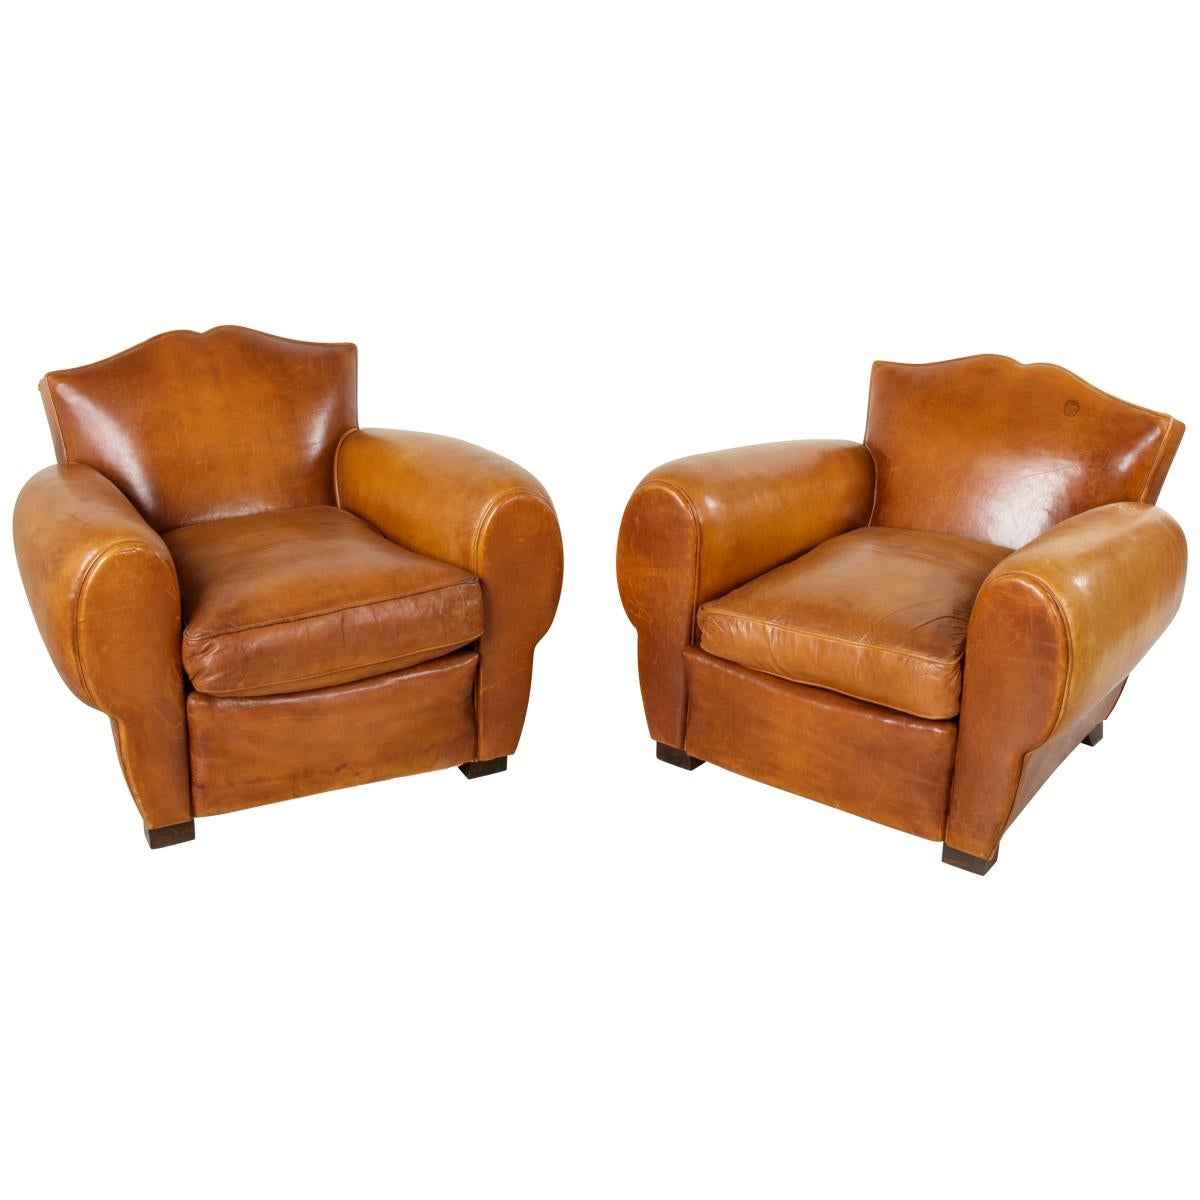 Pair of French Art Deco Leather Club Chairs, Moustache Back Club Chairs